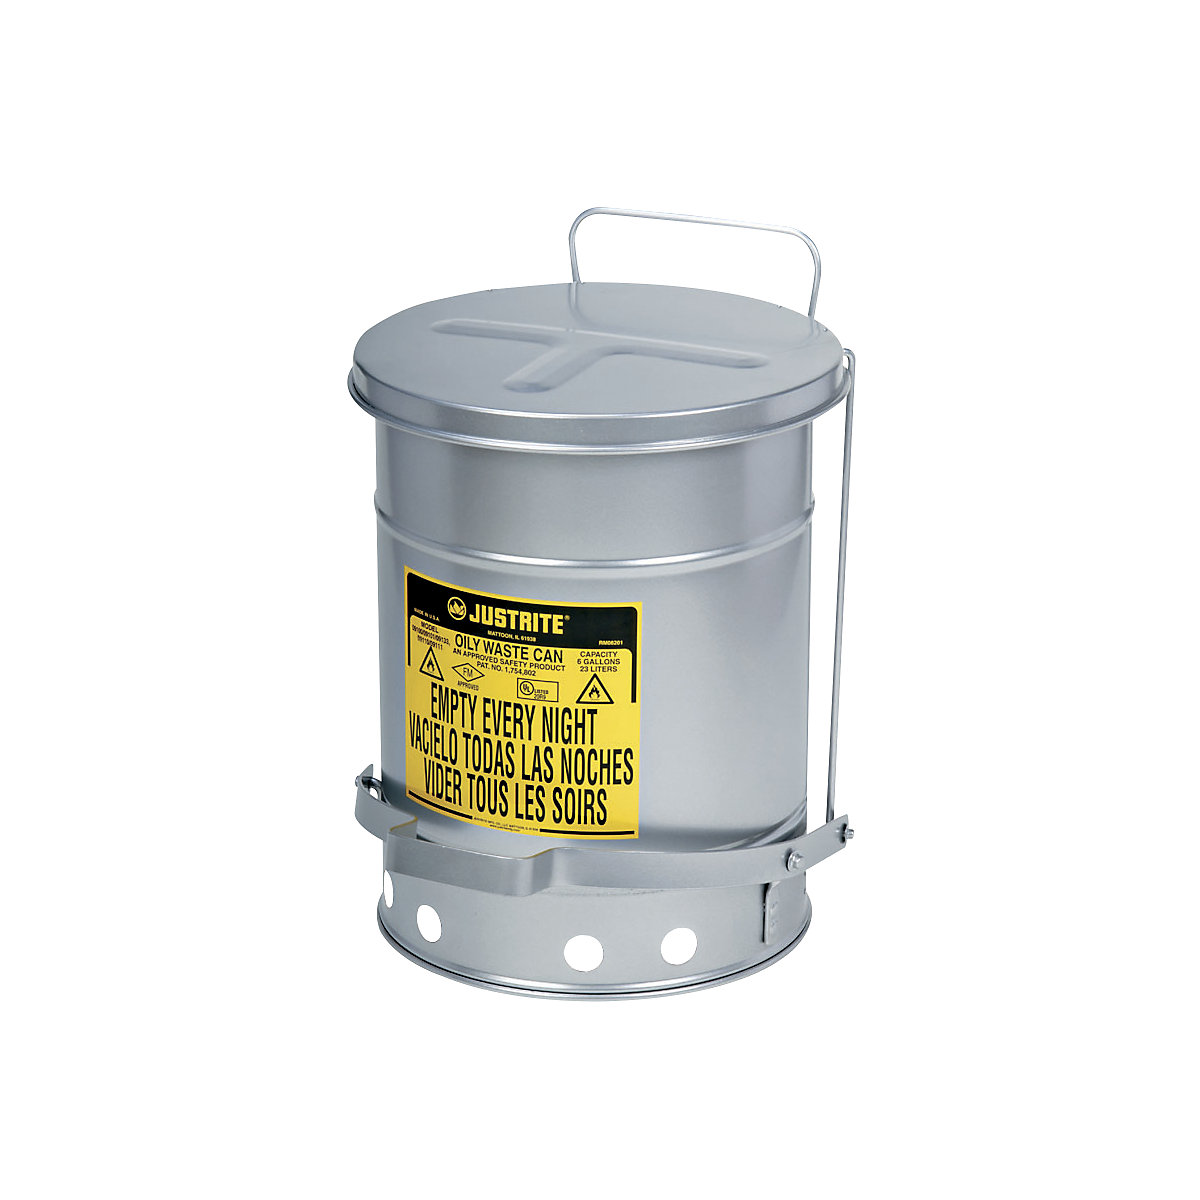 Low noise SoundGard™ safety disposal cans – Justrite, lid closes softly and quietly, painted silver, capacity 52 l-7